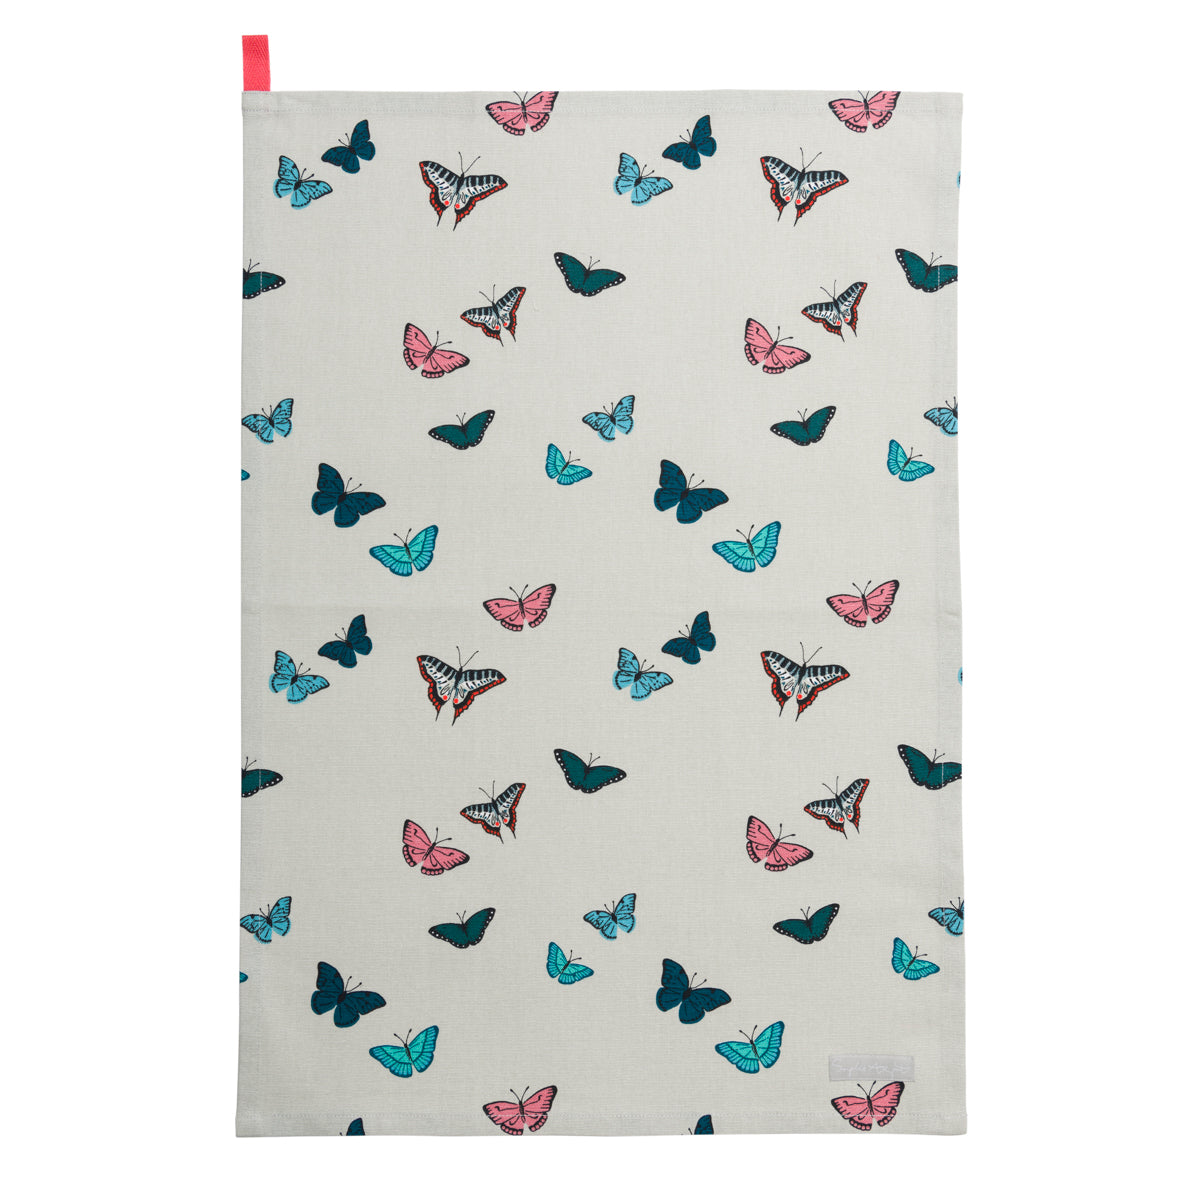 Colourful butterflies sit on this Sophie Allport tea towel with a soft neutral background.